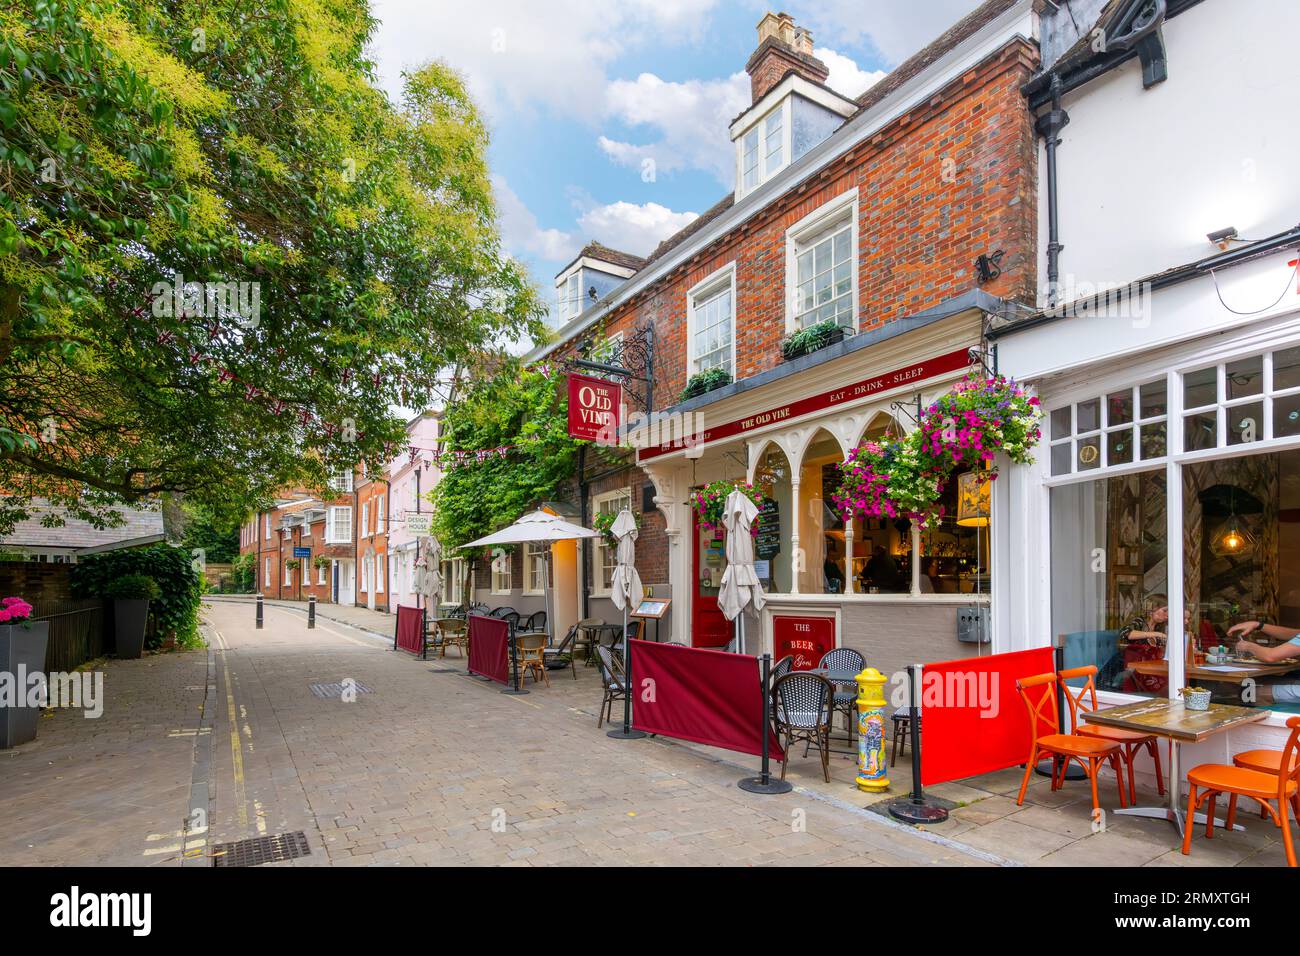 General view of the 18th century Inn and pub The Old Vine, across from the Winchester Cathedral in the town of Winchester, England, United Kingdom. Stock Photo